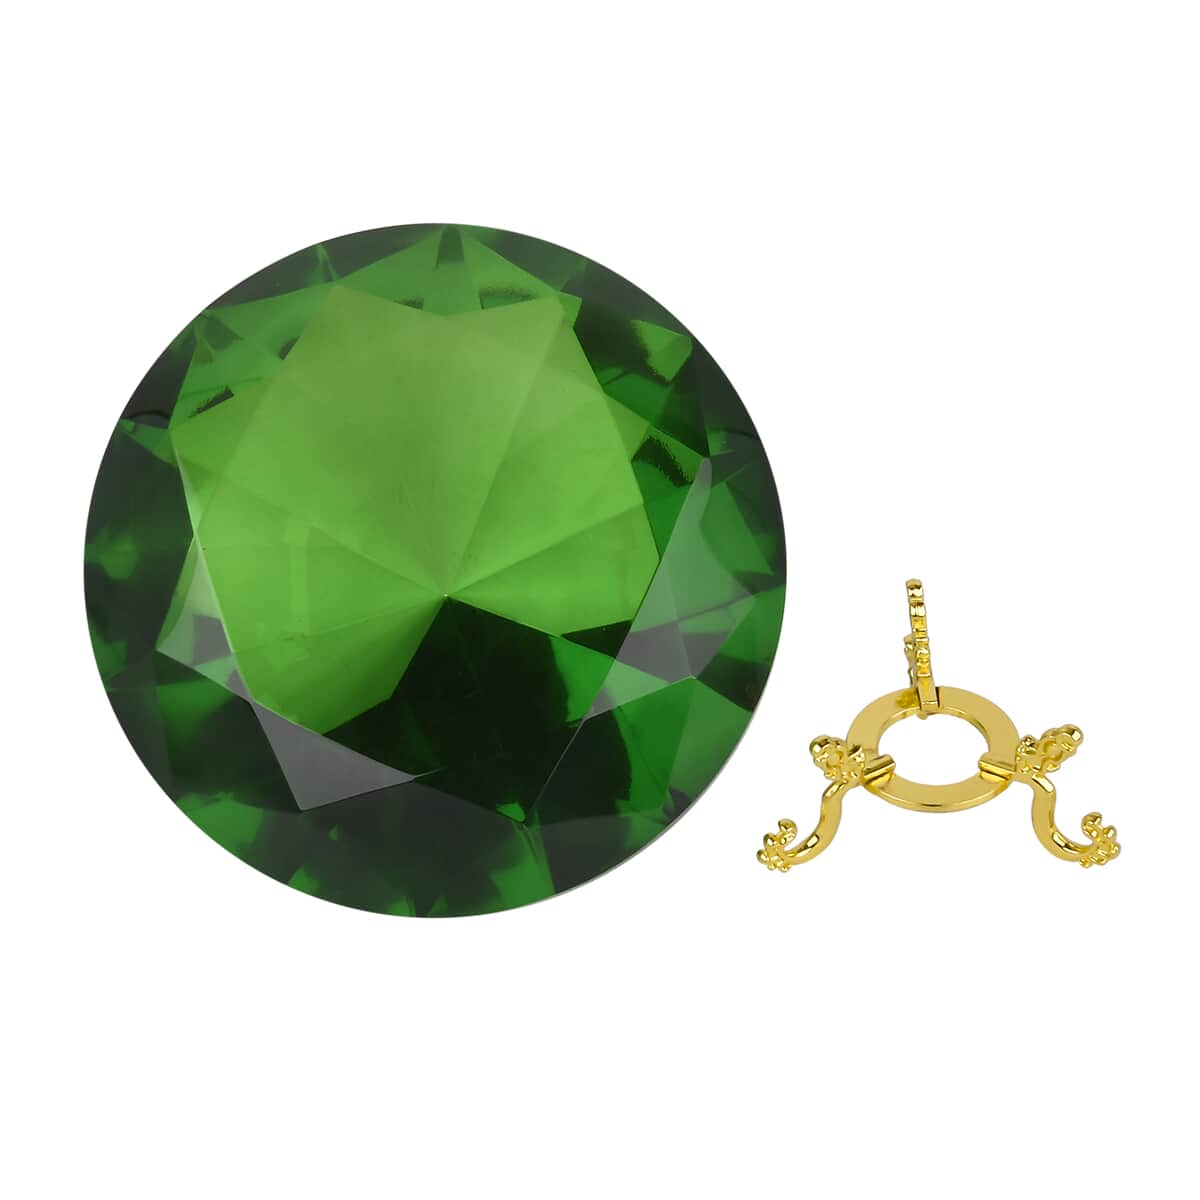 Green Decorative Diamond Shaped Crystal with Stand image number 0